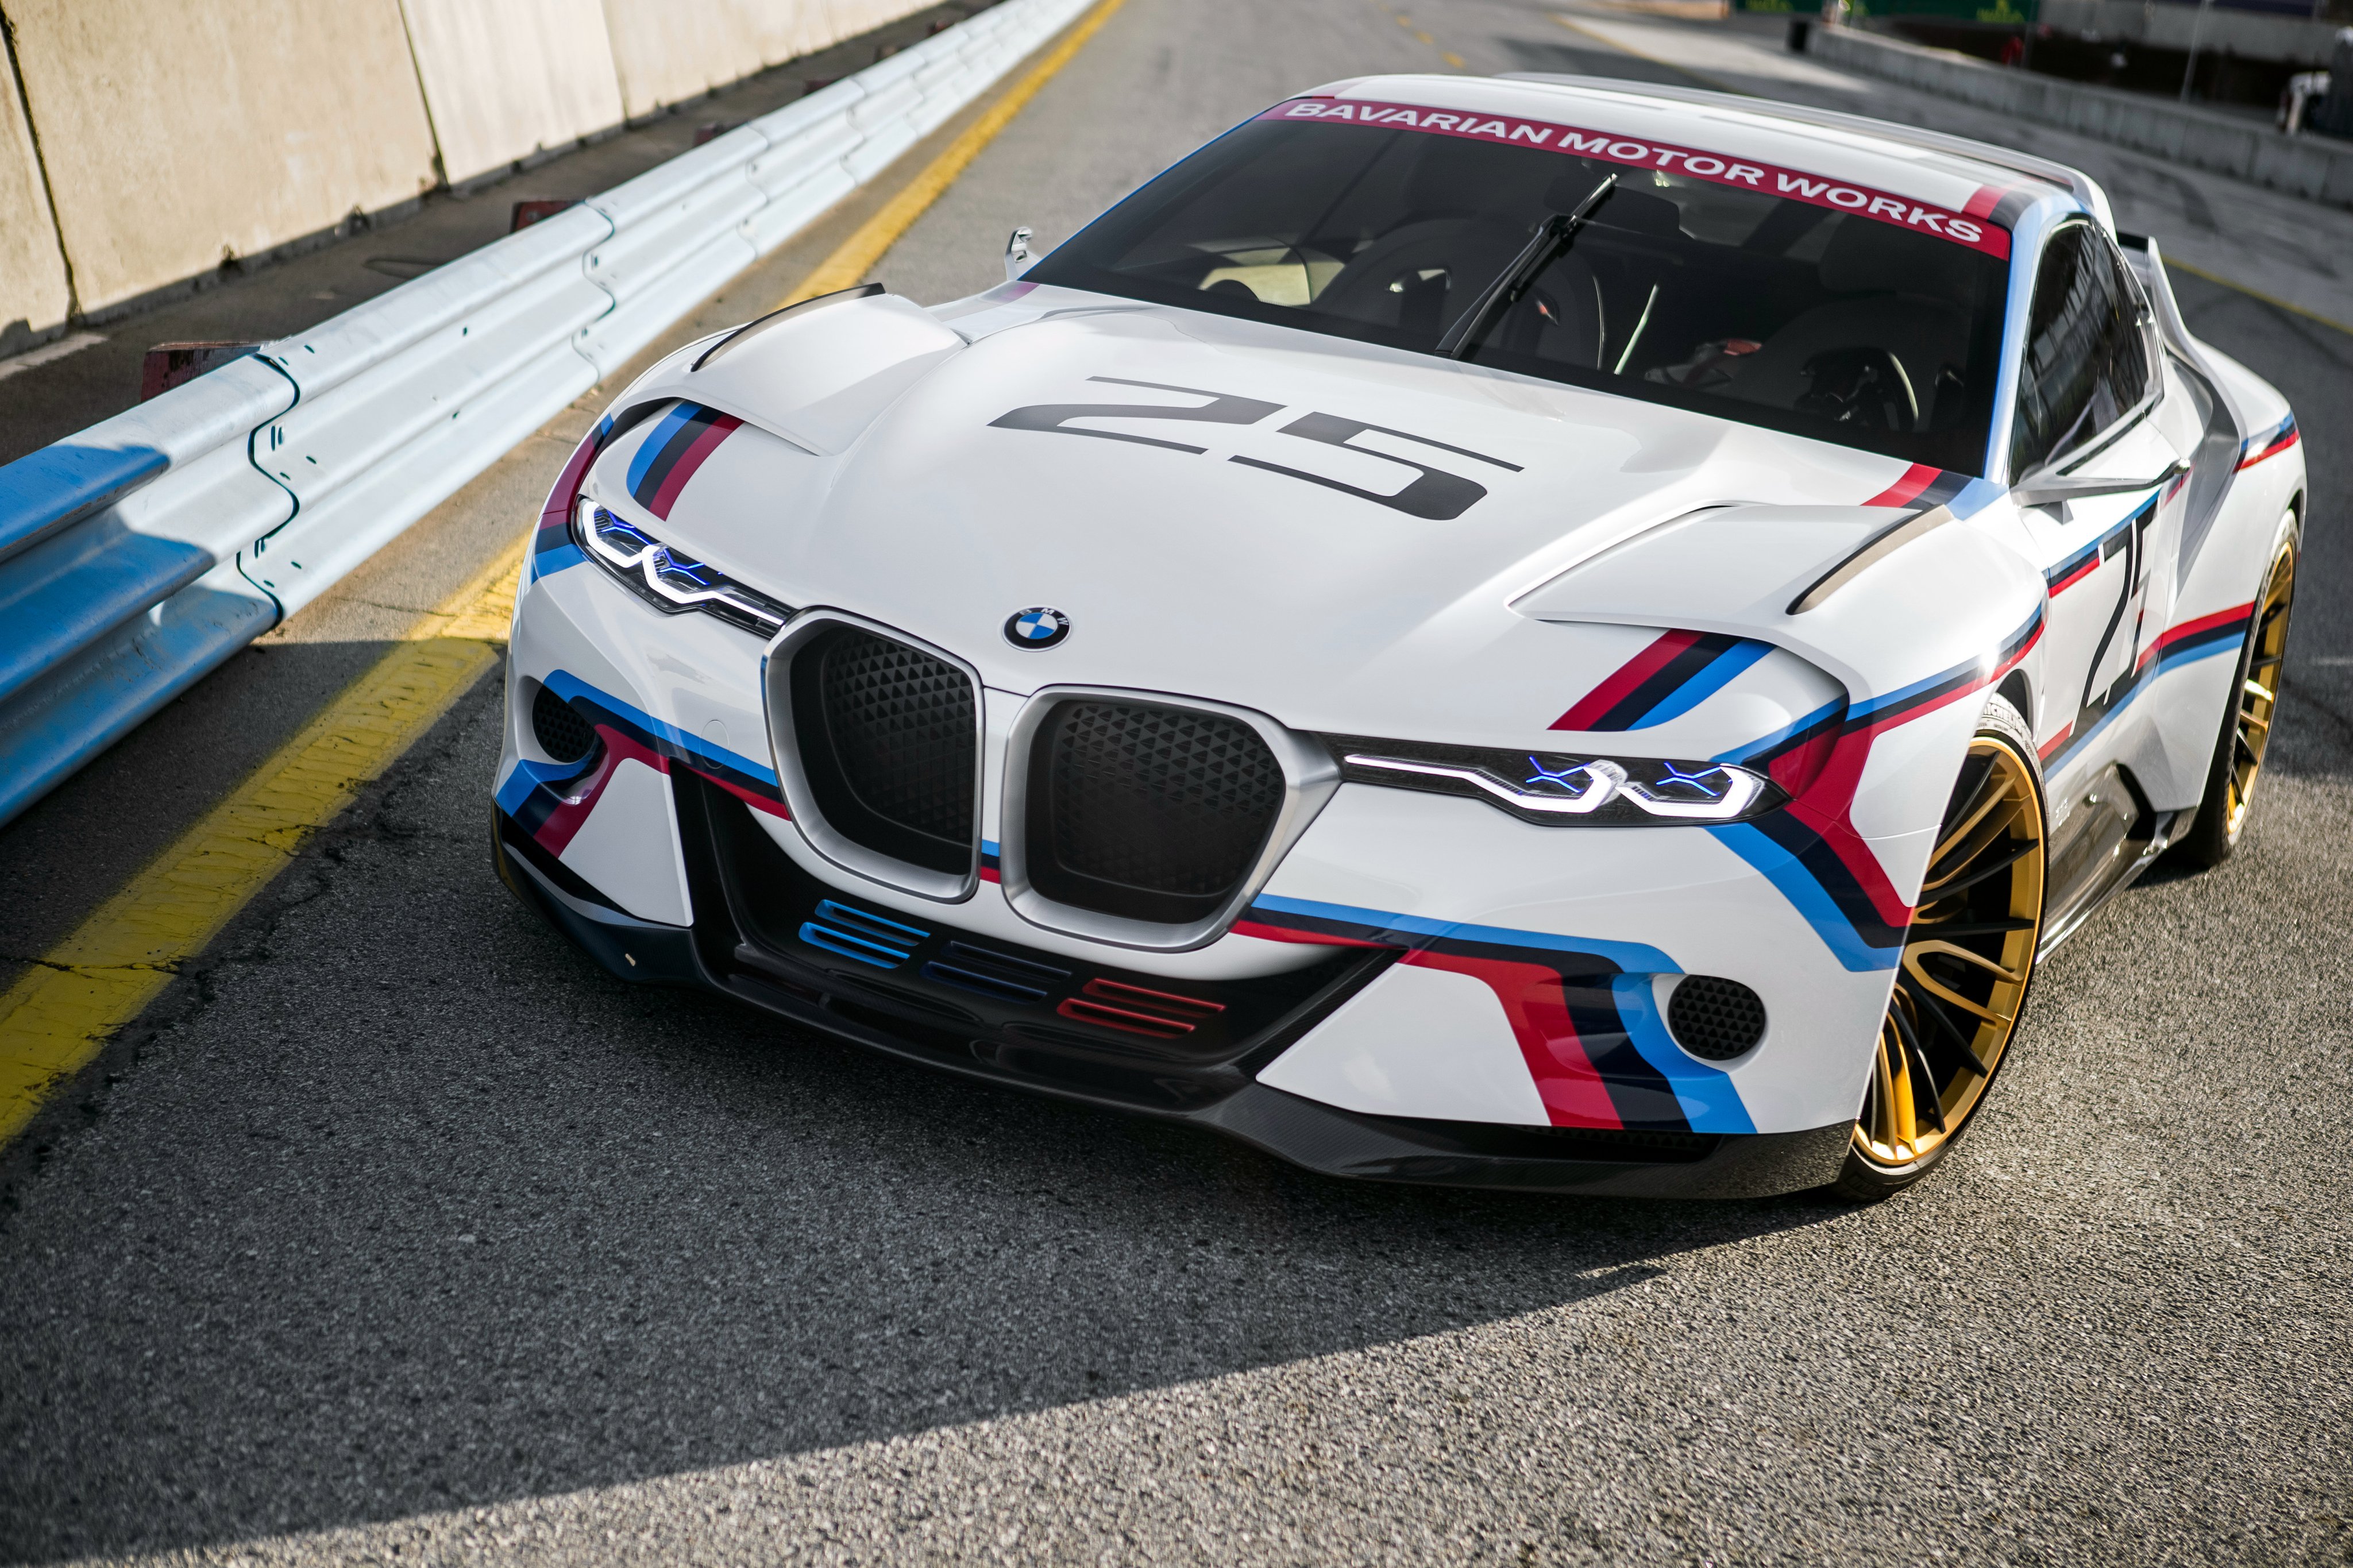 2015, Bmw, 3 0, Csl, Hommage, R, Tuning, Concept, Race, Racing Wallpaper